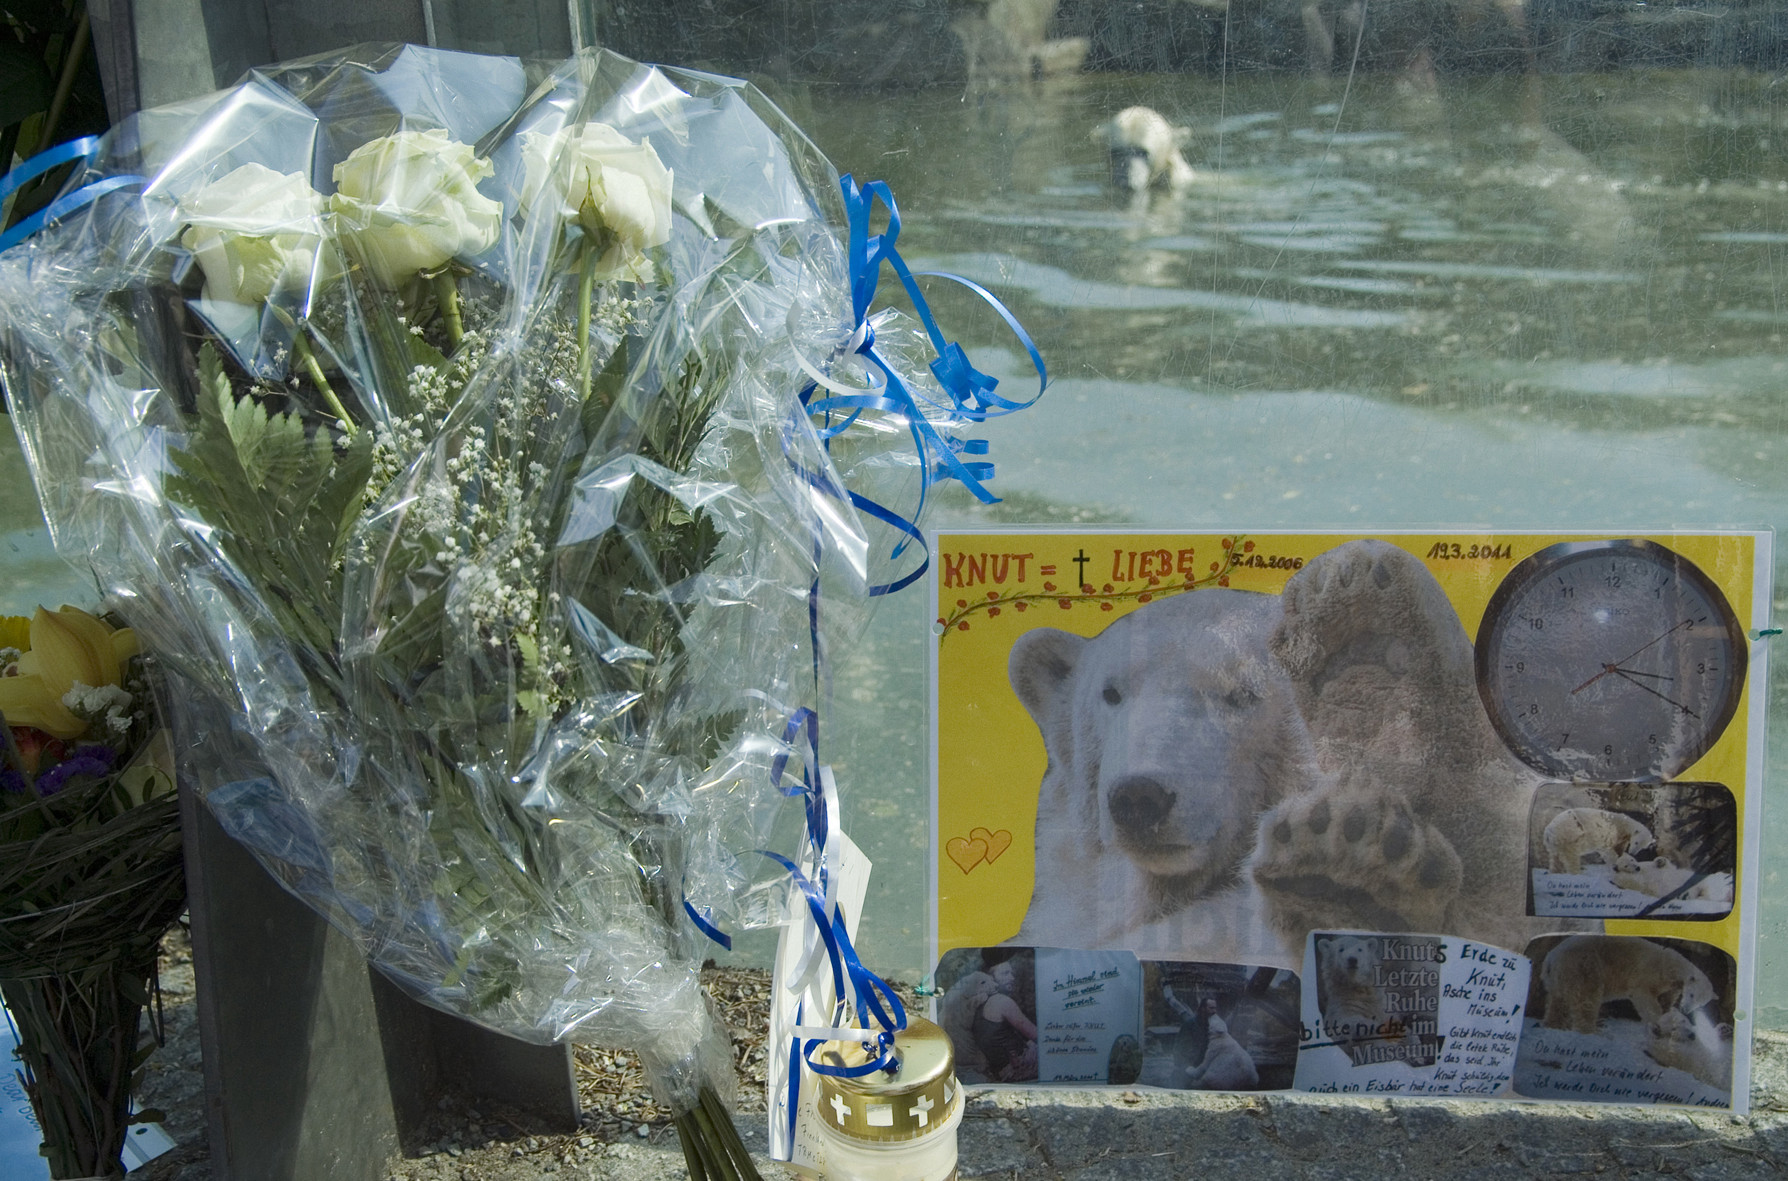 Flowers and images in front of the glass of the polar bear enclosure. A polar bear swims in the background.